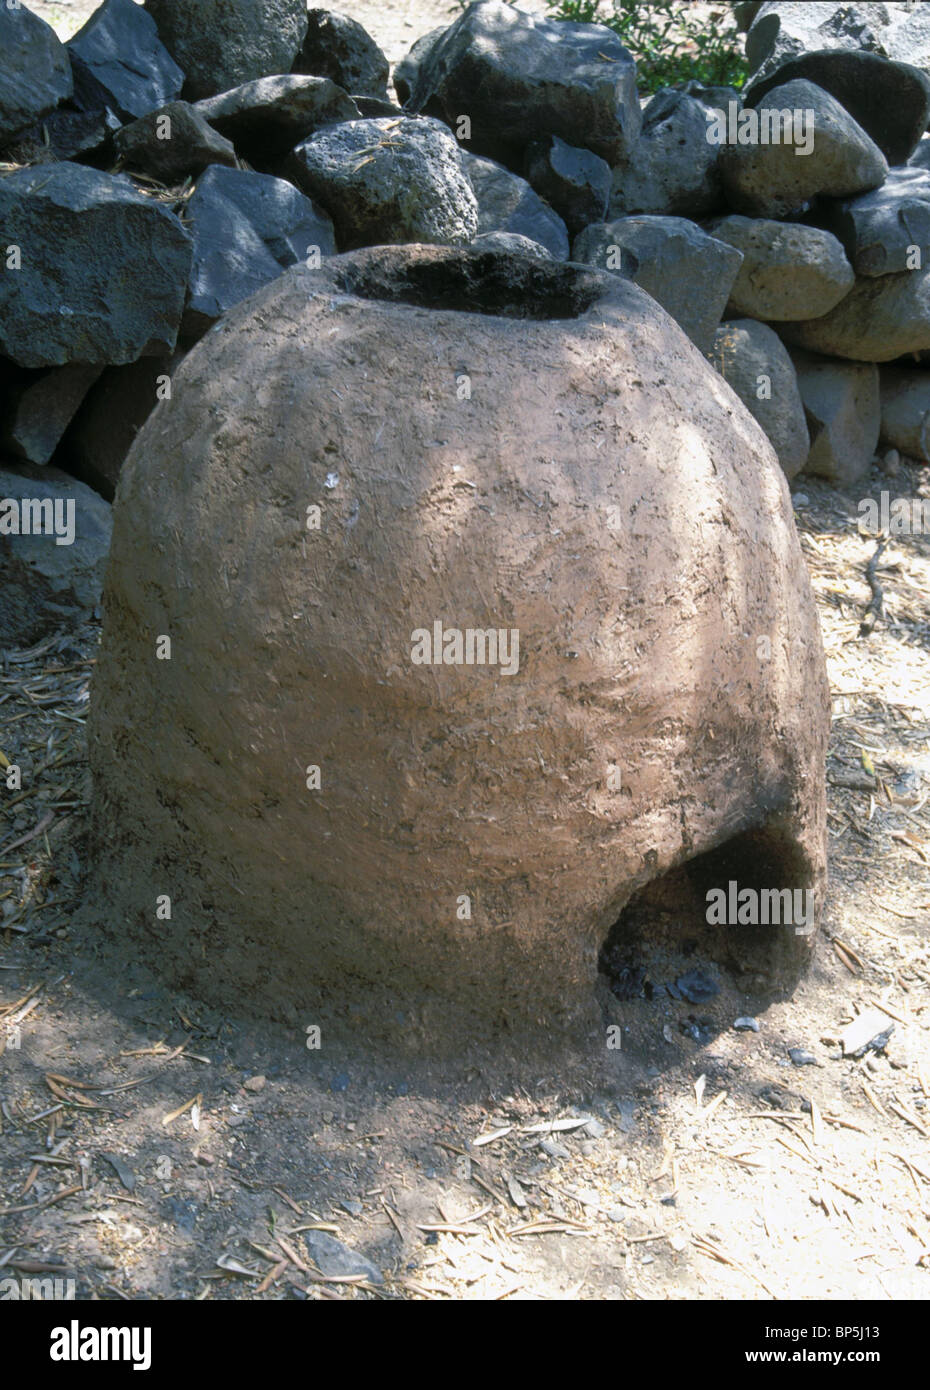 3465. CLAY MADE OVEN USED FOR HOME COOKING (THE POT IS PLACED ON THE OPENING ON THE TOP) Stock Photo